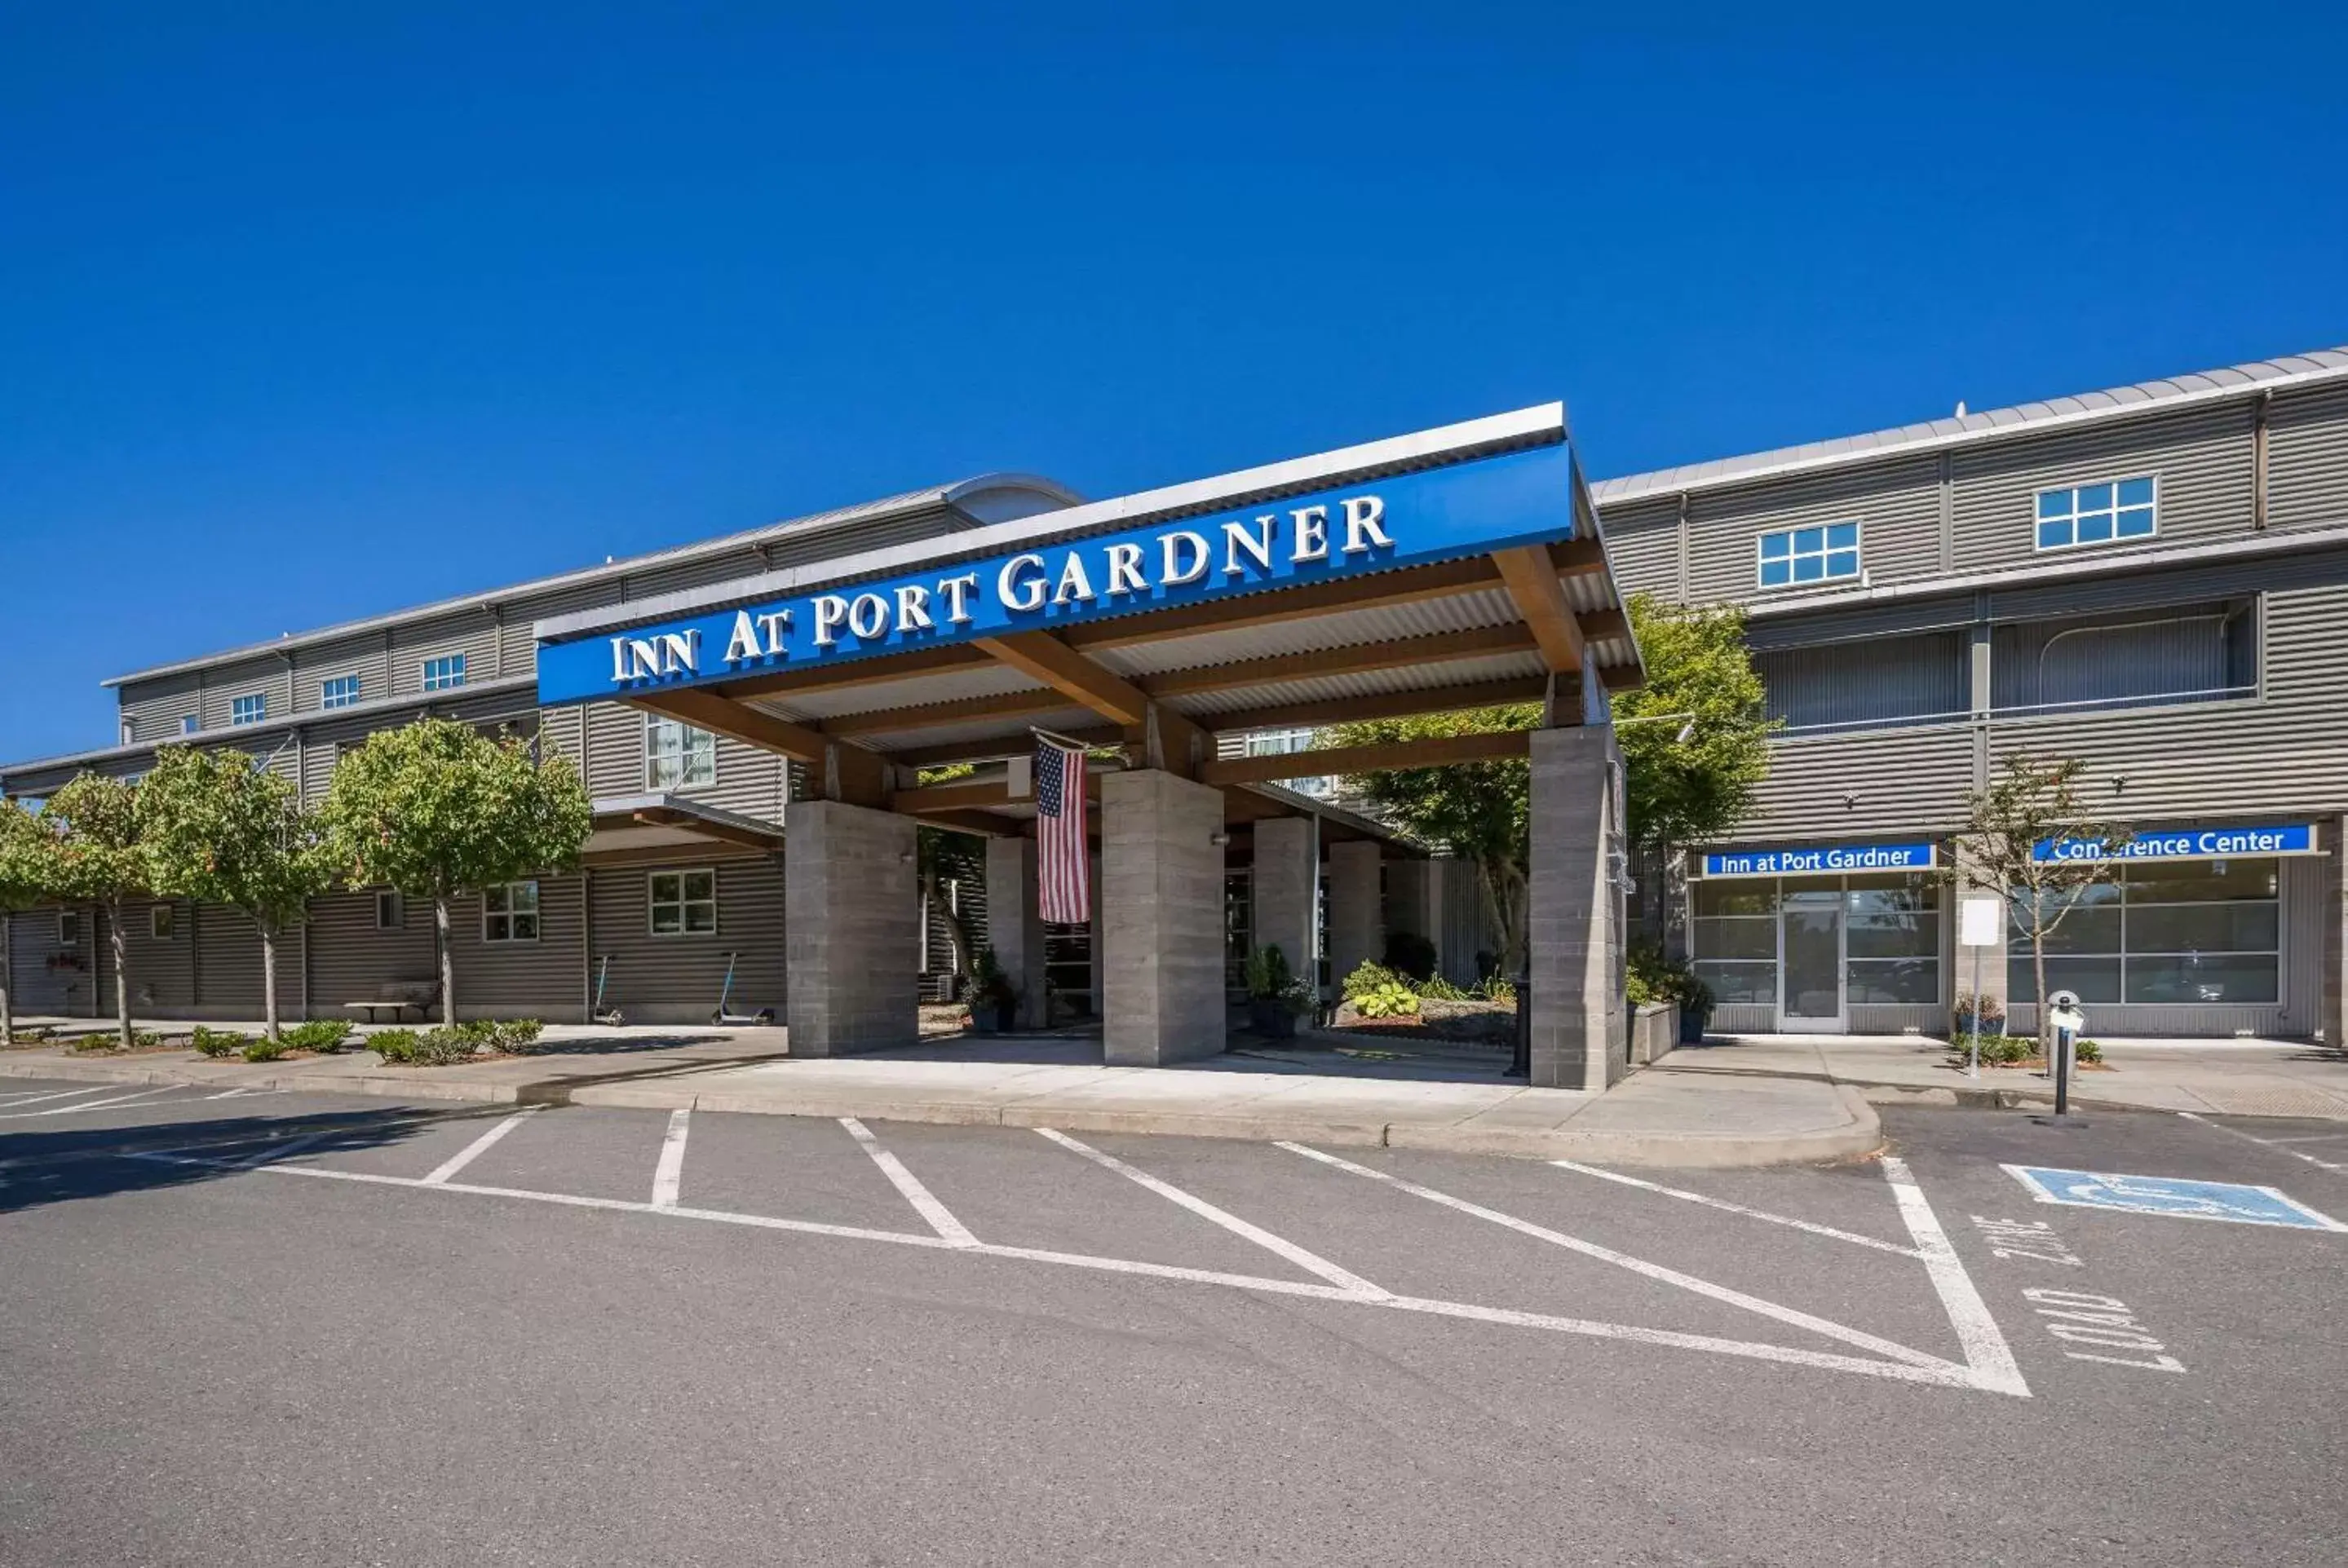 Property Building in Inn at Port Gardner-Everett Waterfront, Ascend Hotel Collection